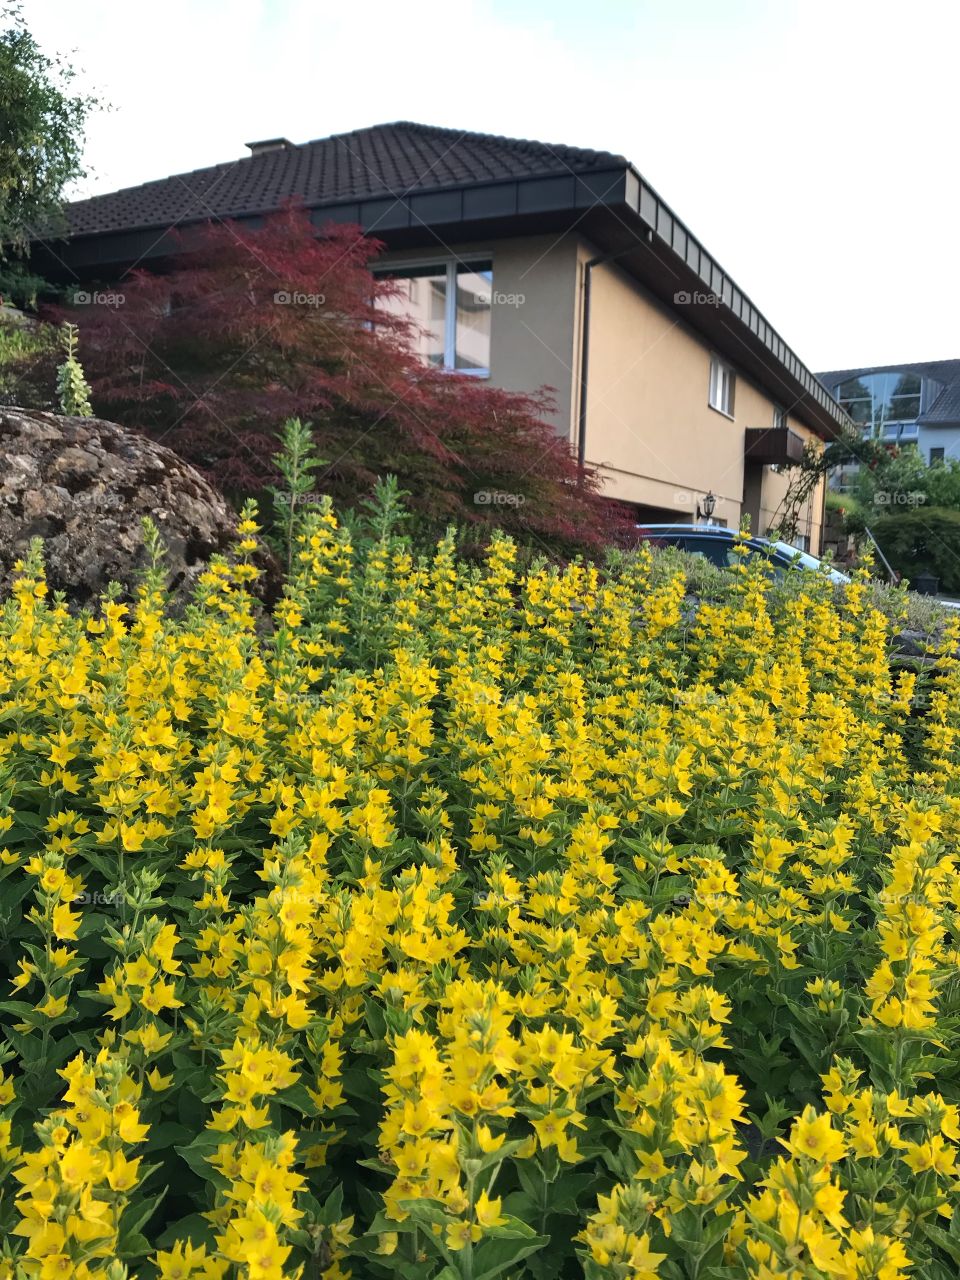 Yellow flowers and maple tree in front of a house in Switzerland 